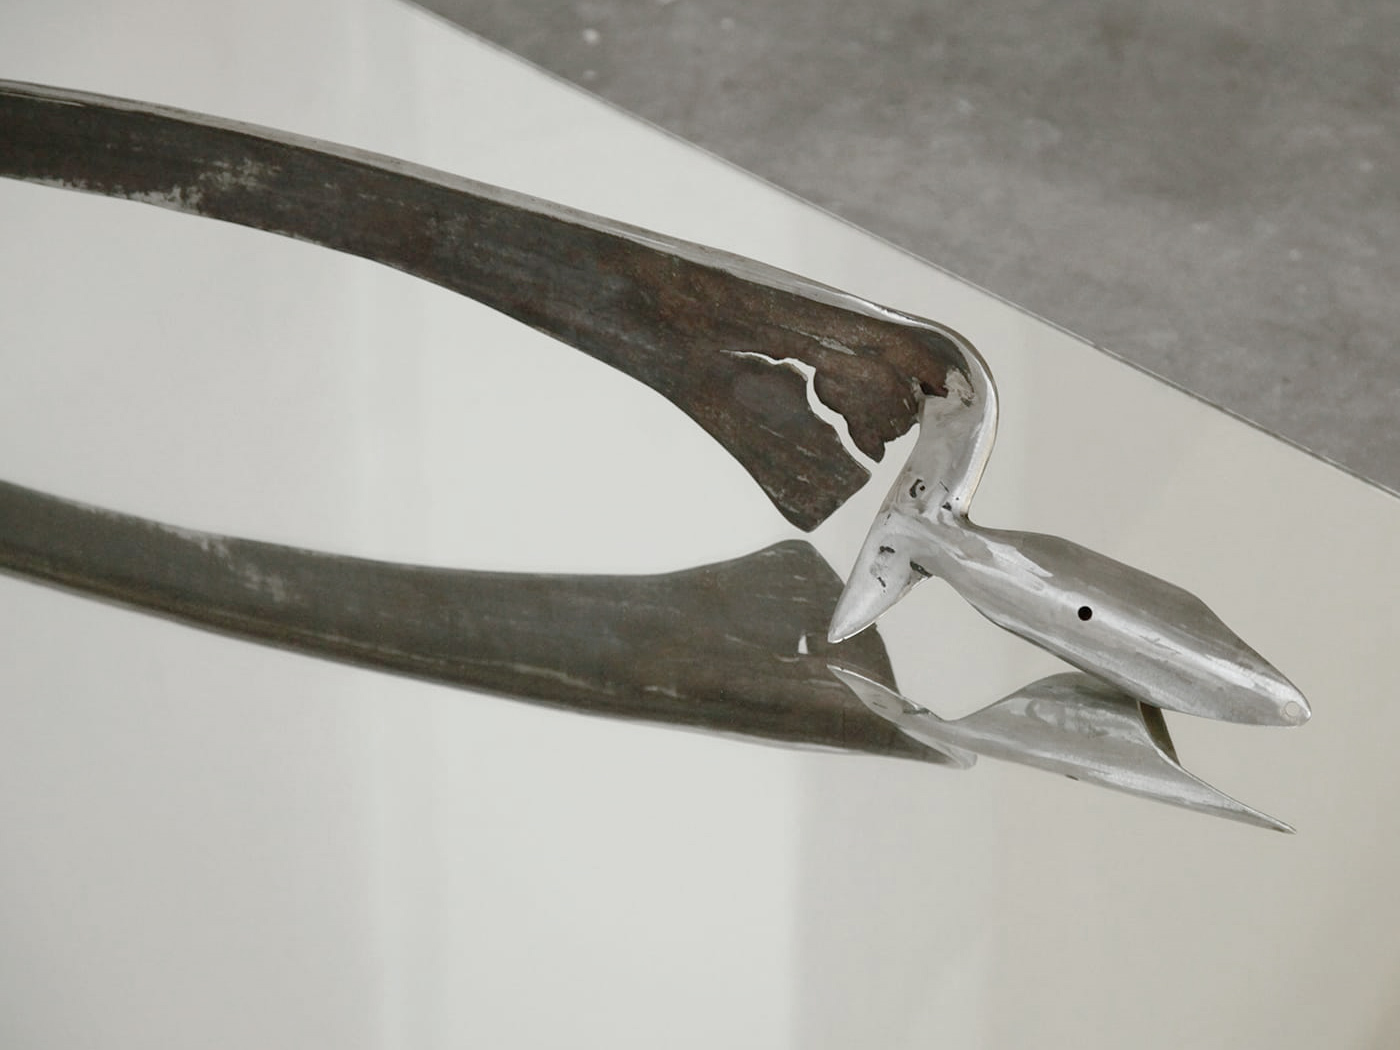 Close-up of a steel war scythe on a reflective surface.